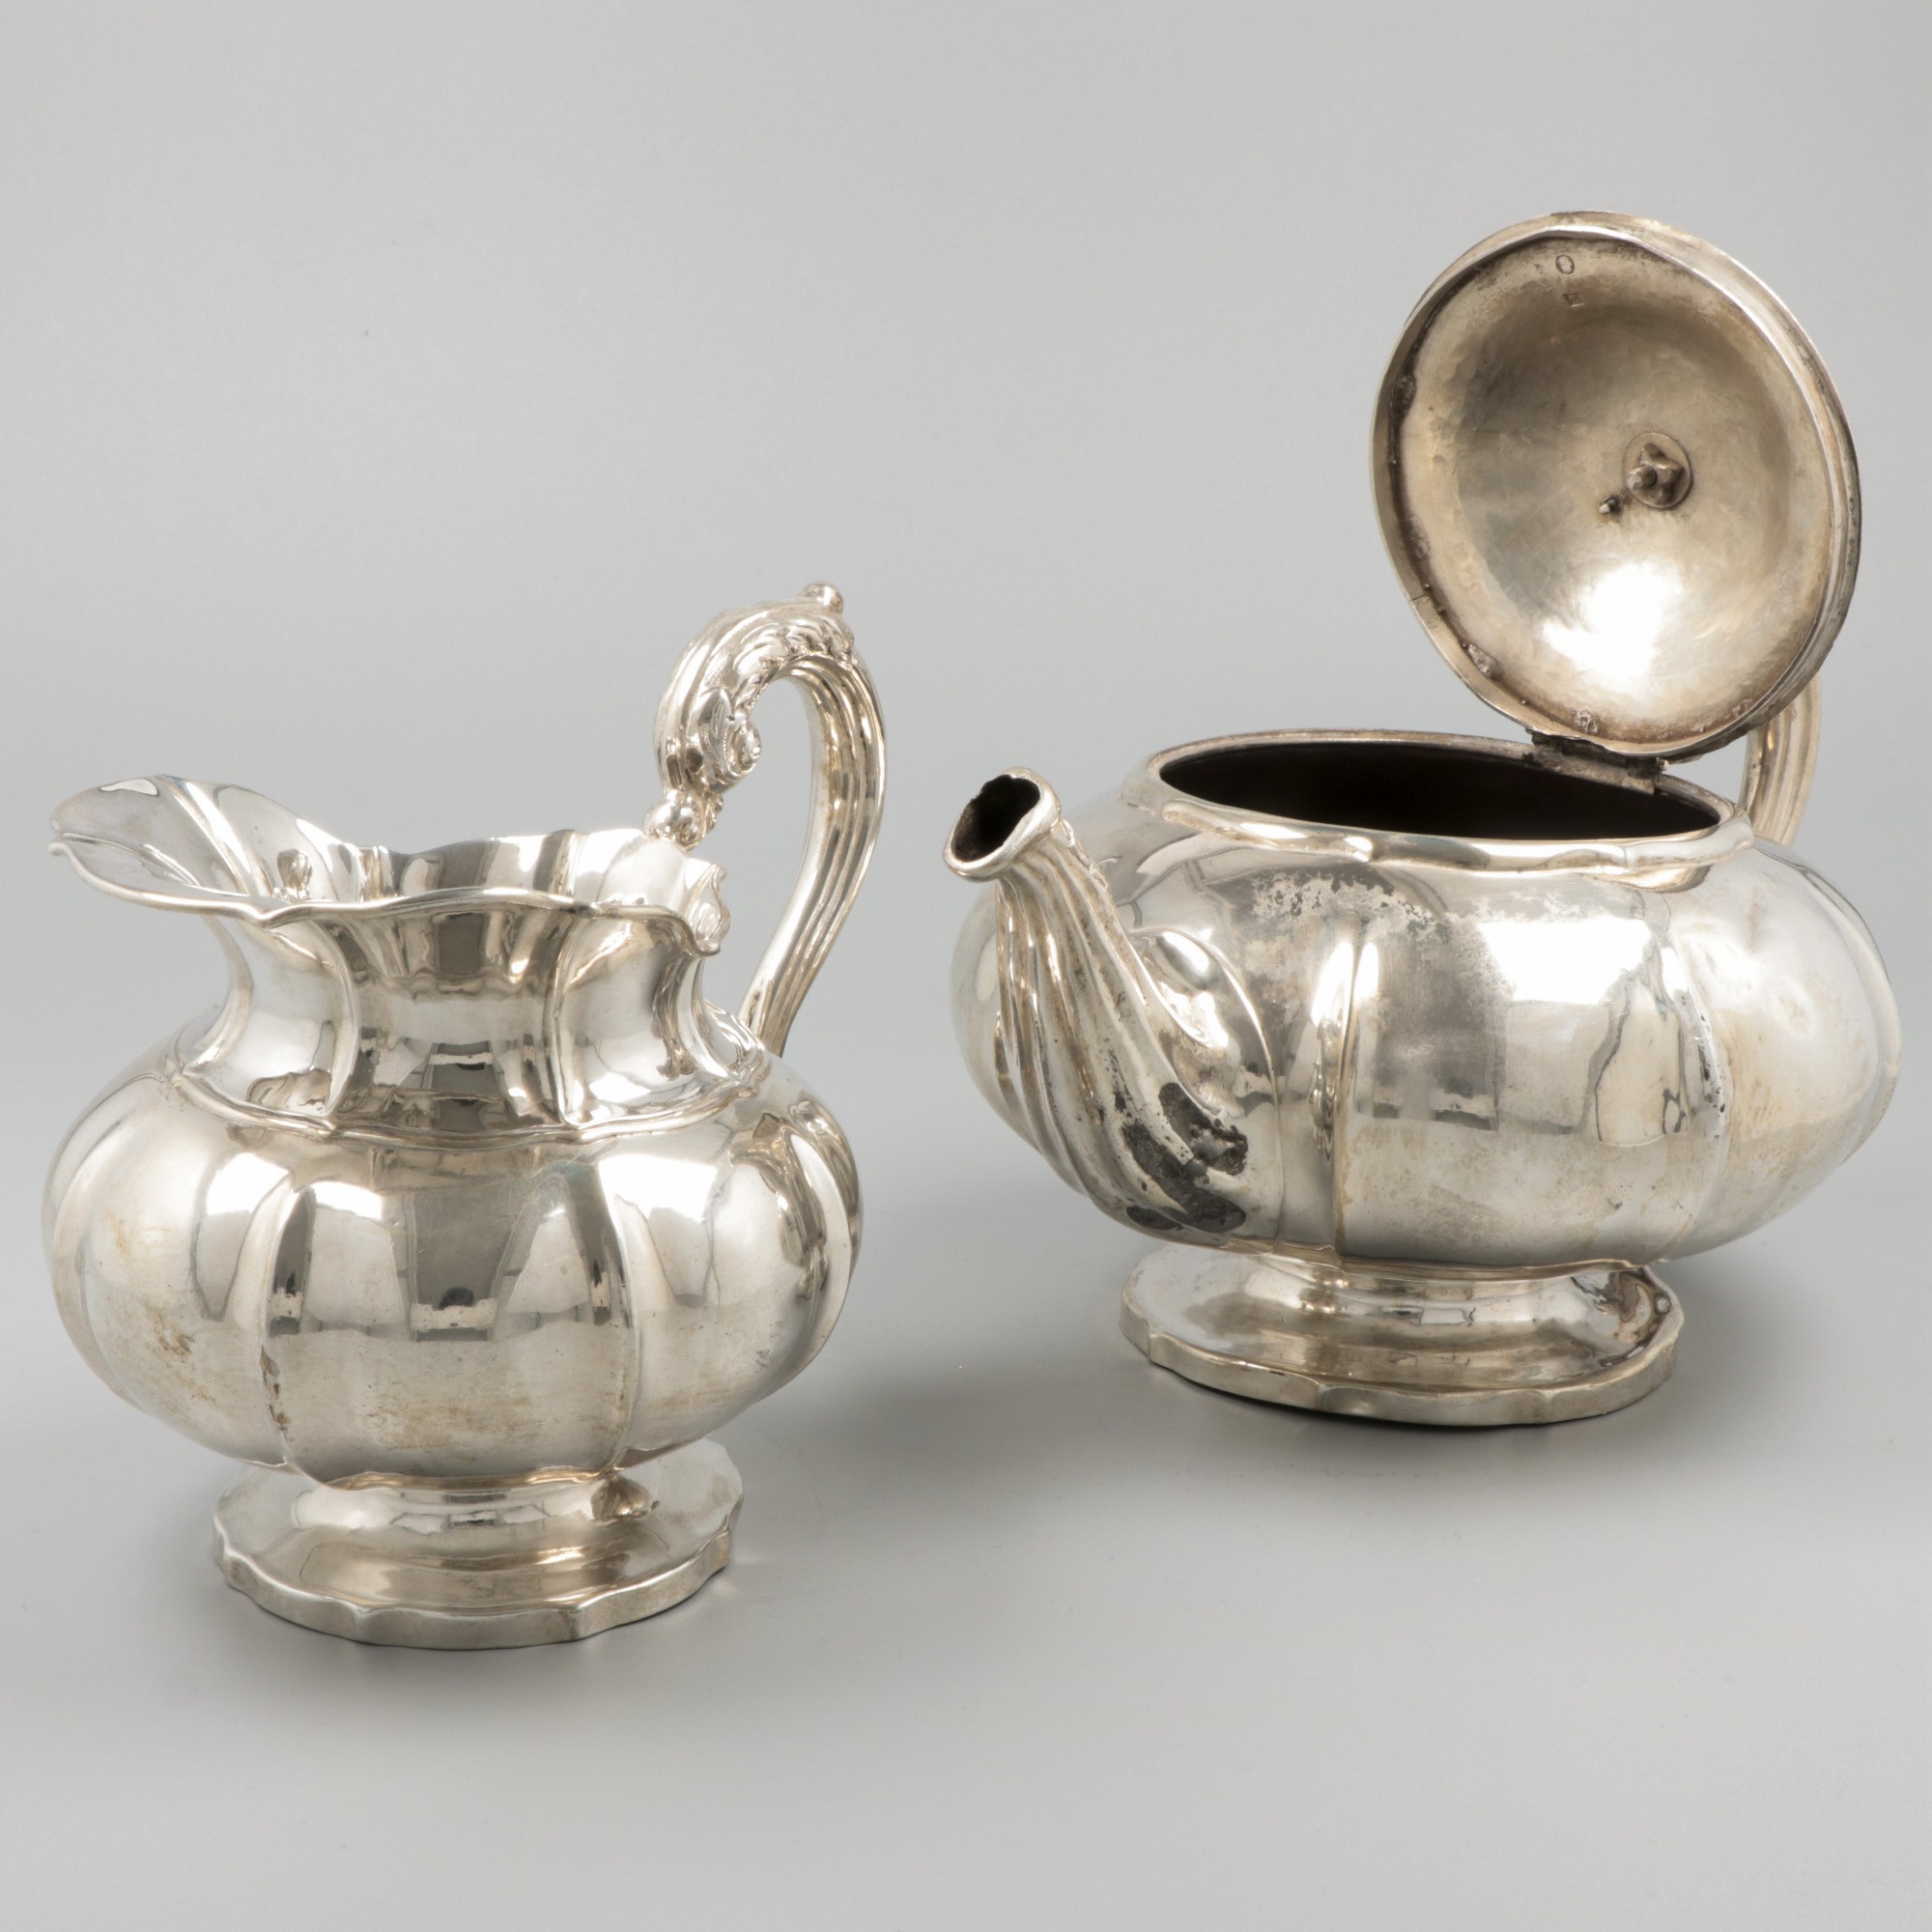 Teapot and milk jug silver. - Image 3 of 9